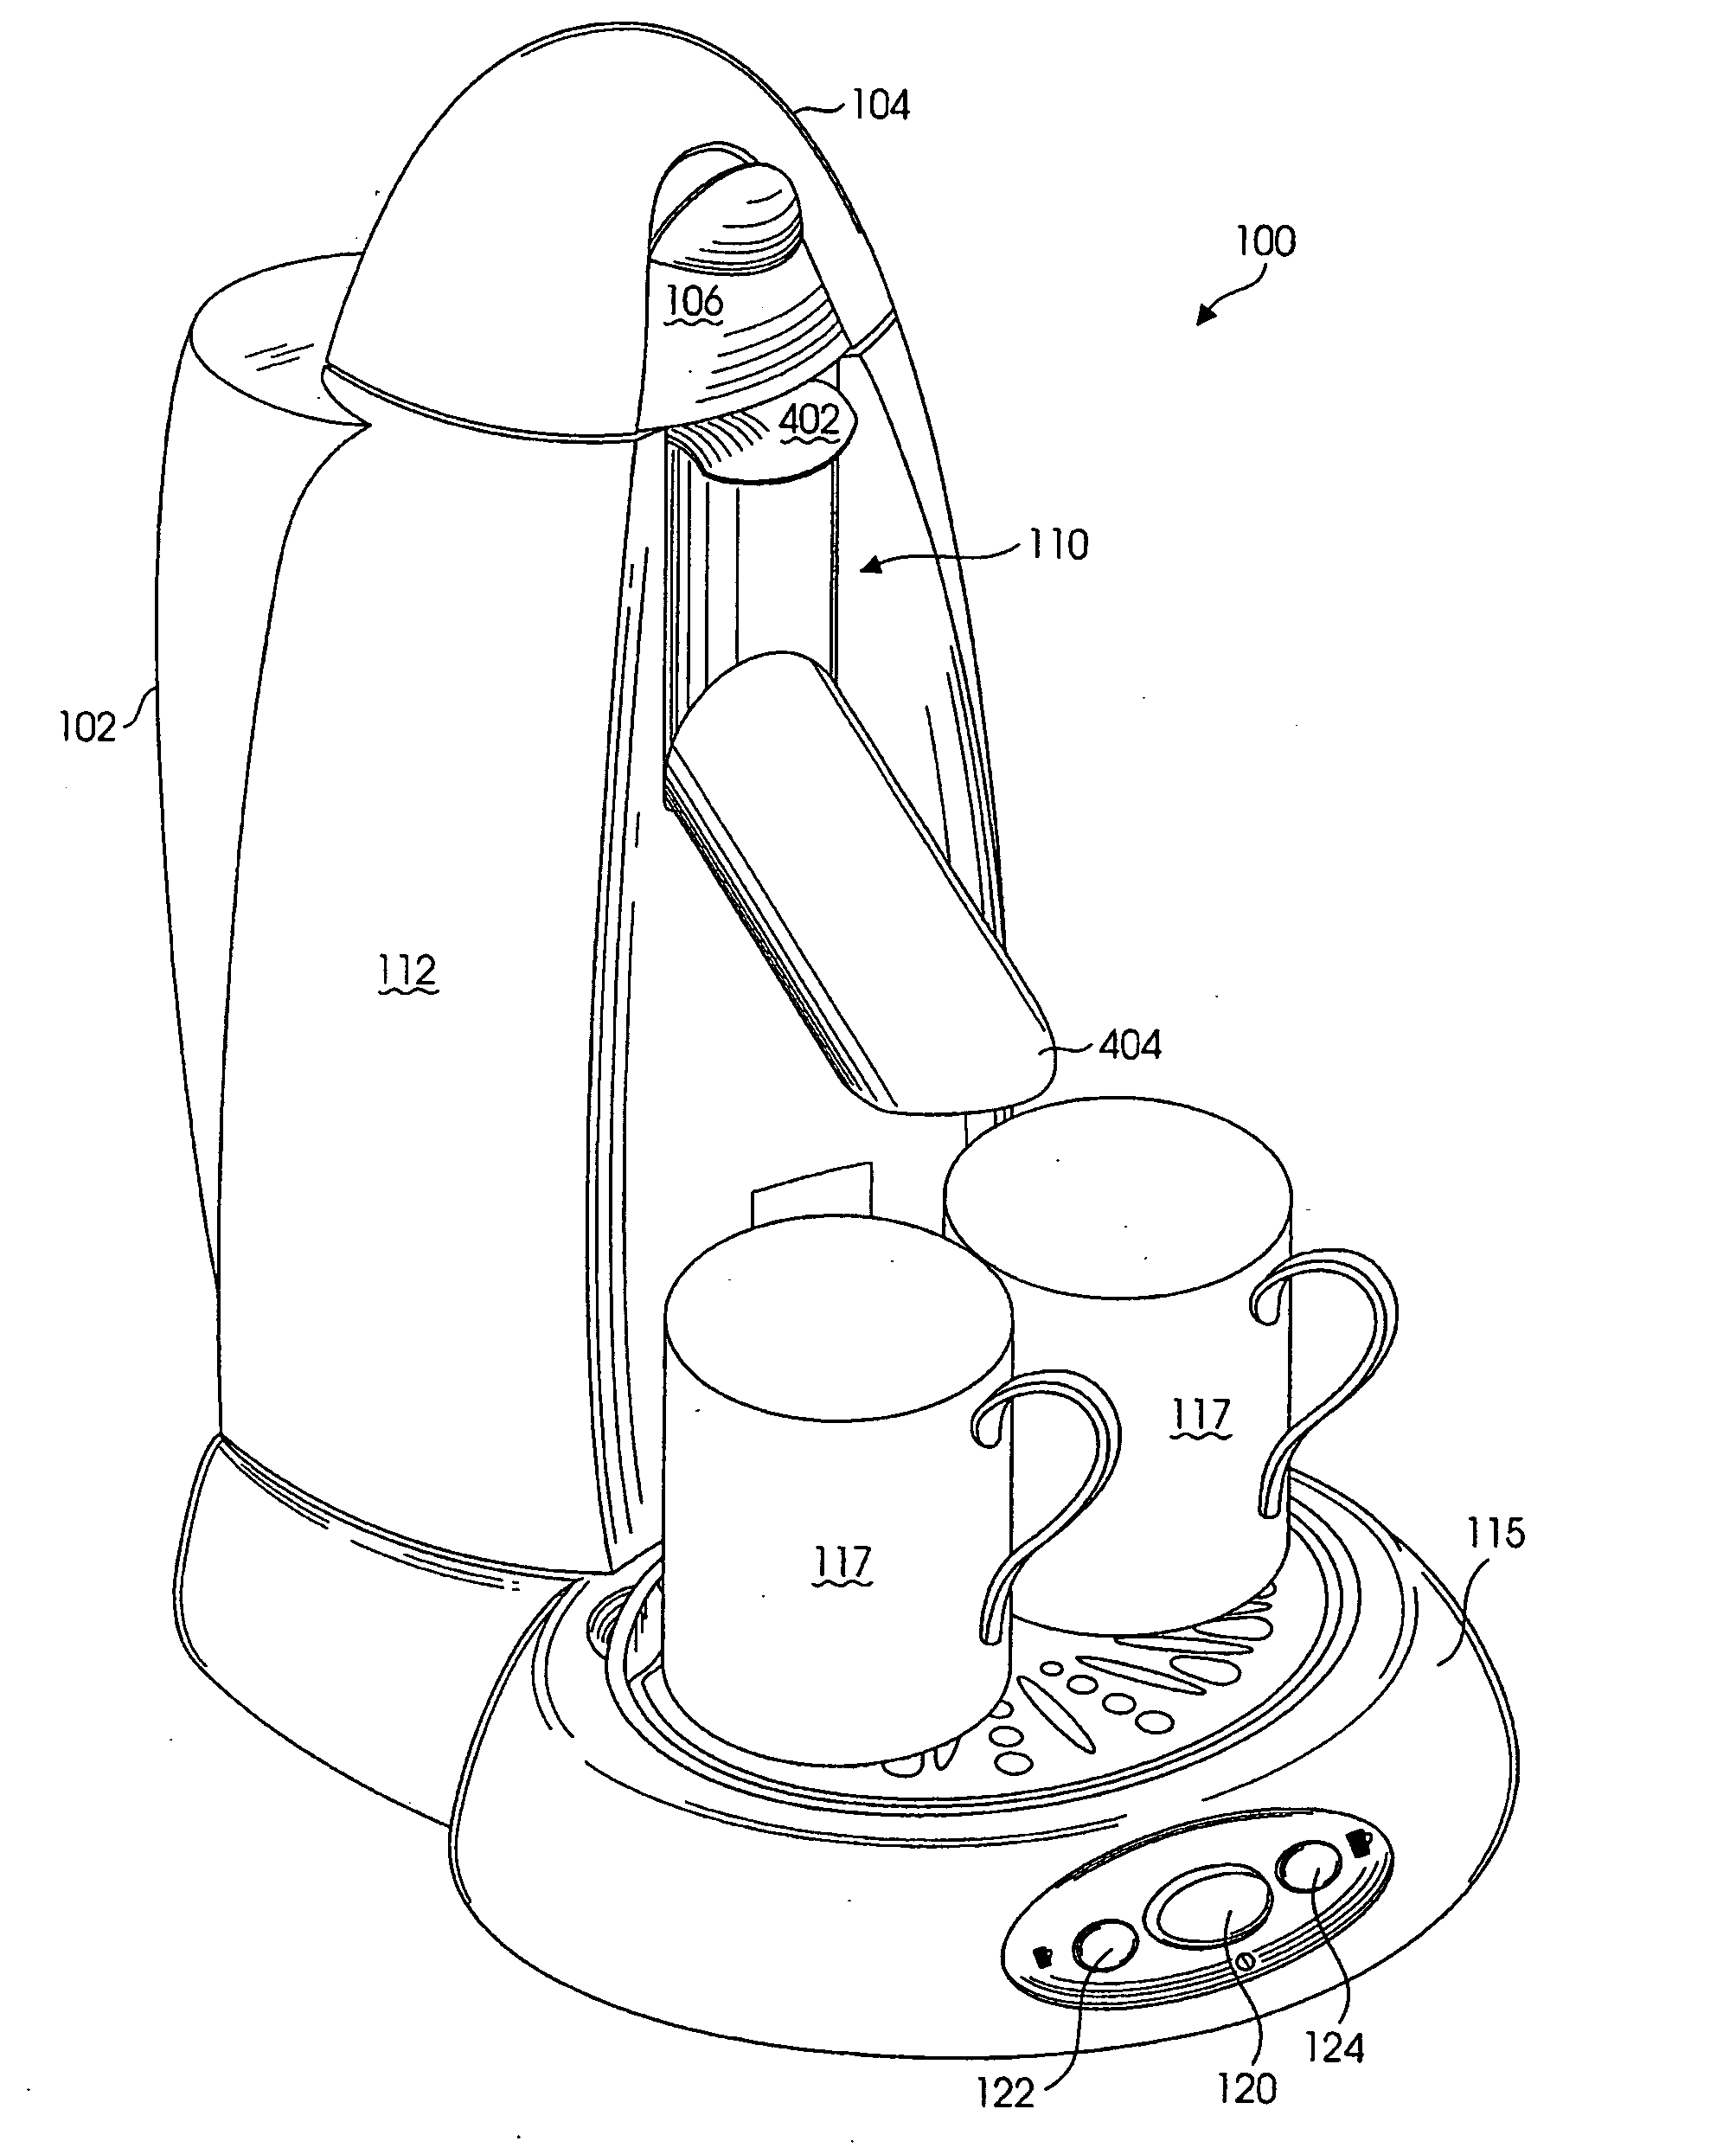 Apparatus for making brewed coffee and the like